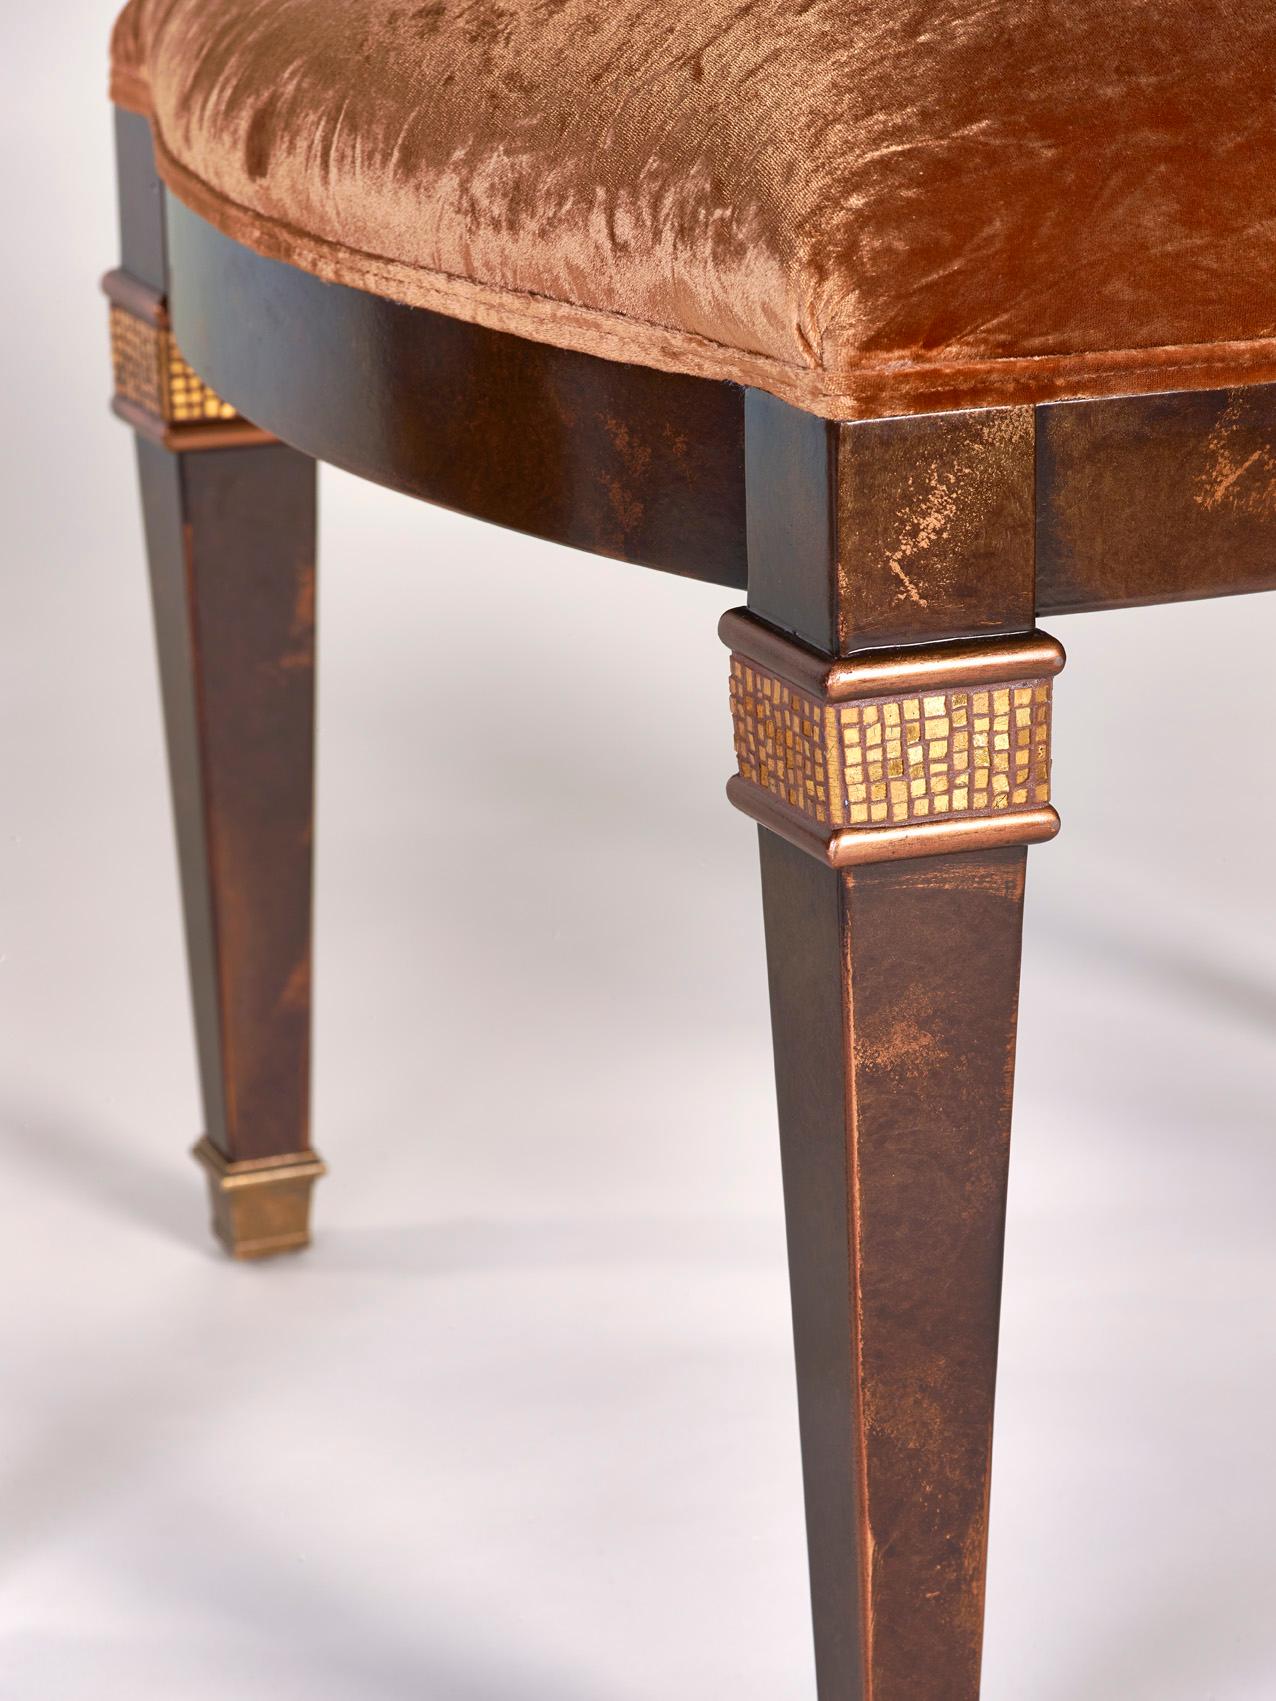 Contemporary Chair Carved Solidwood Distressed Fonish Bronzed Feet Caps Mosaic Insert Legs For Sale